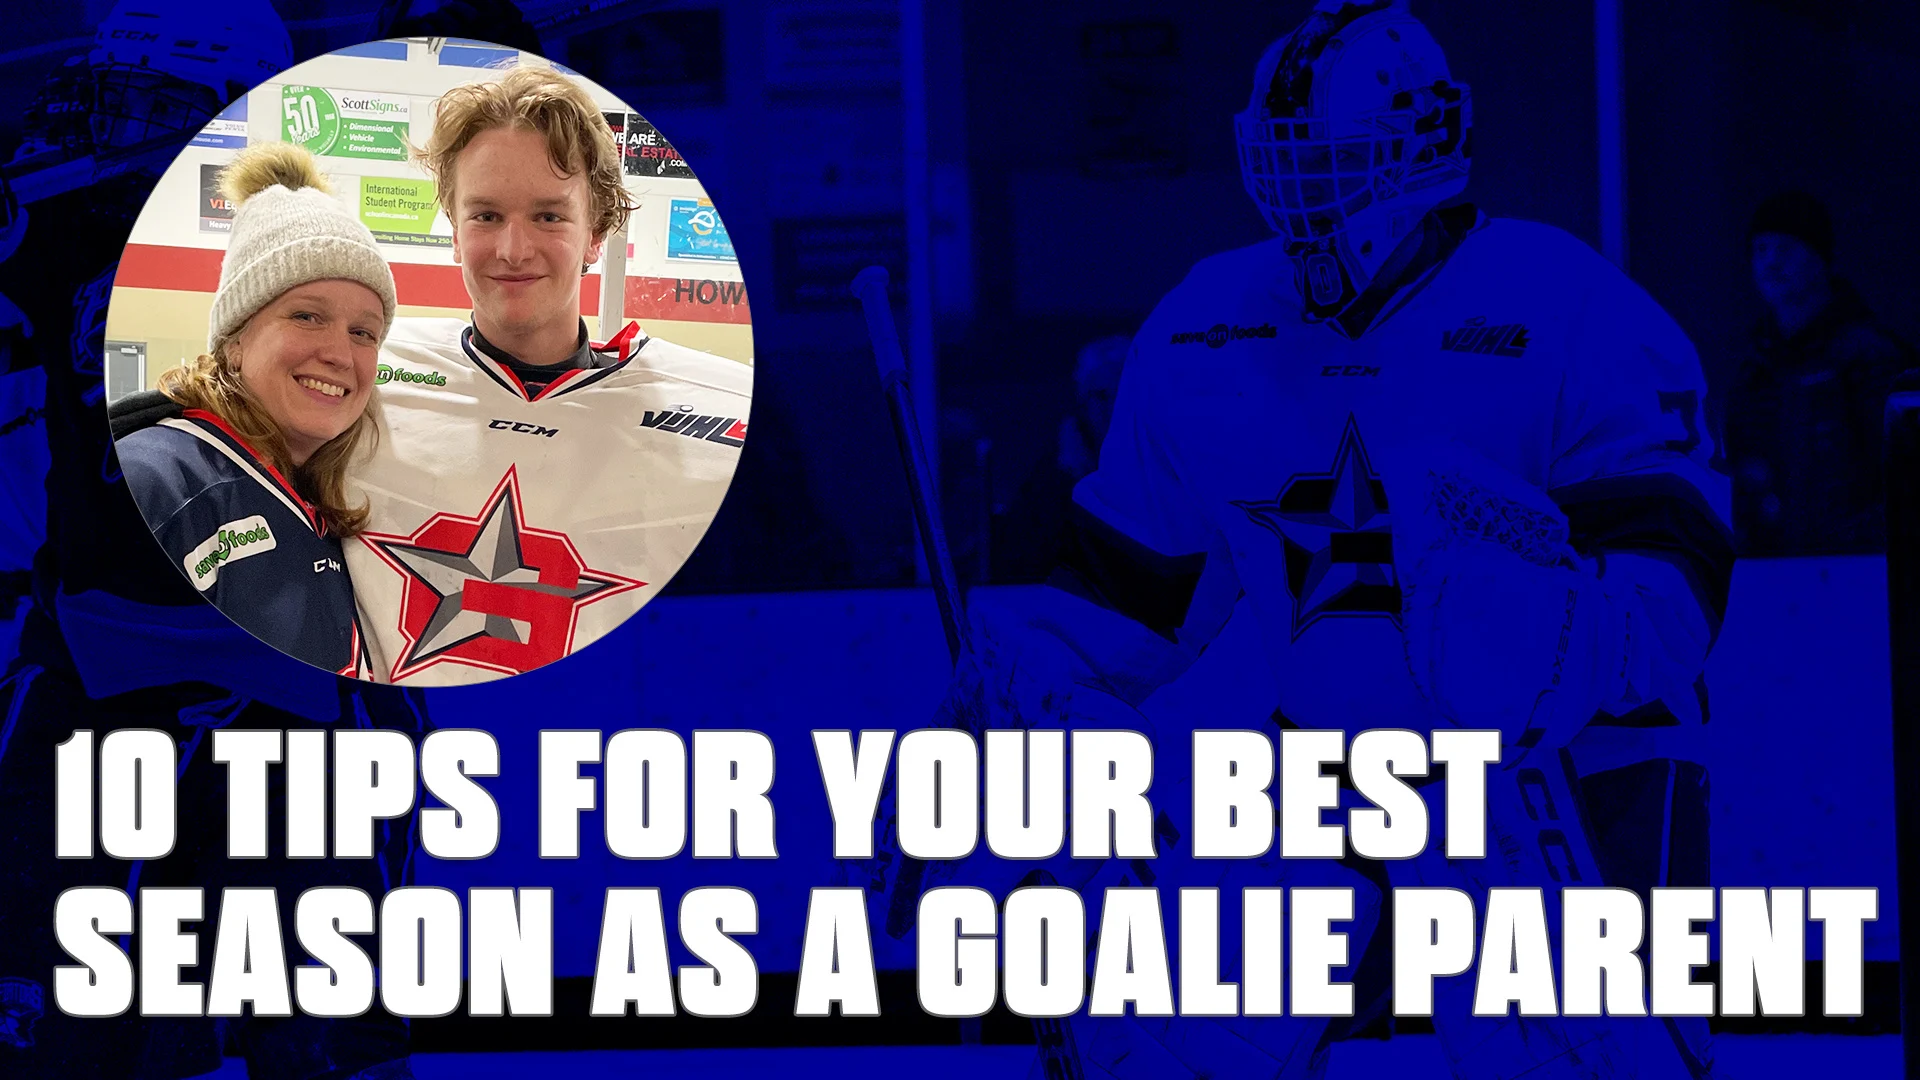 10 Tips for Your Best Season as a Goalie Parent